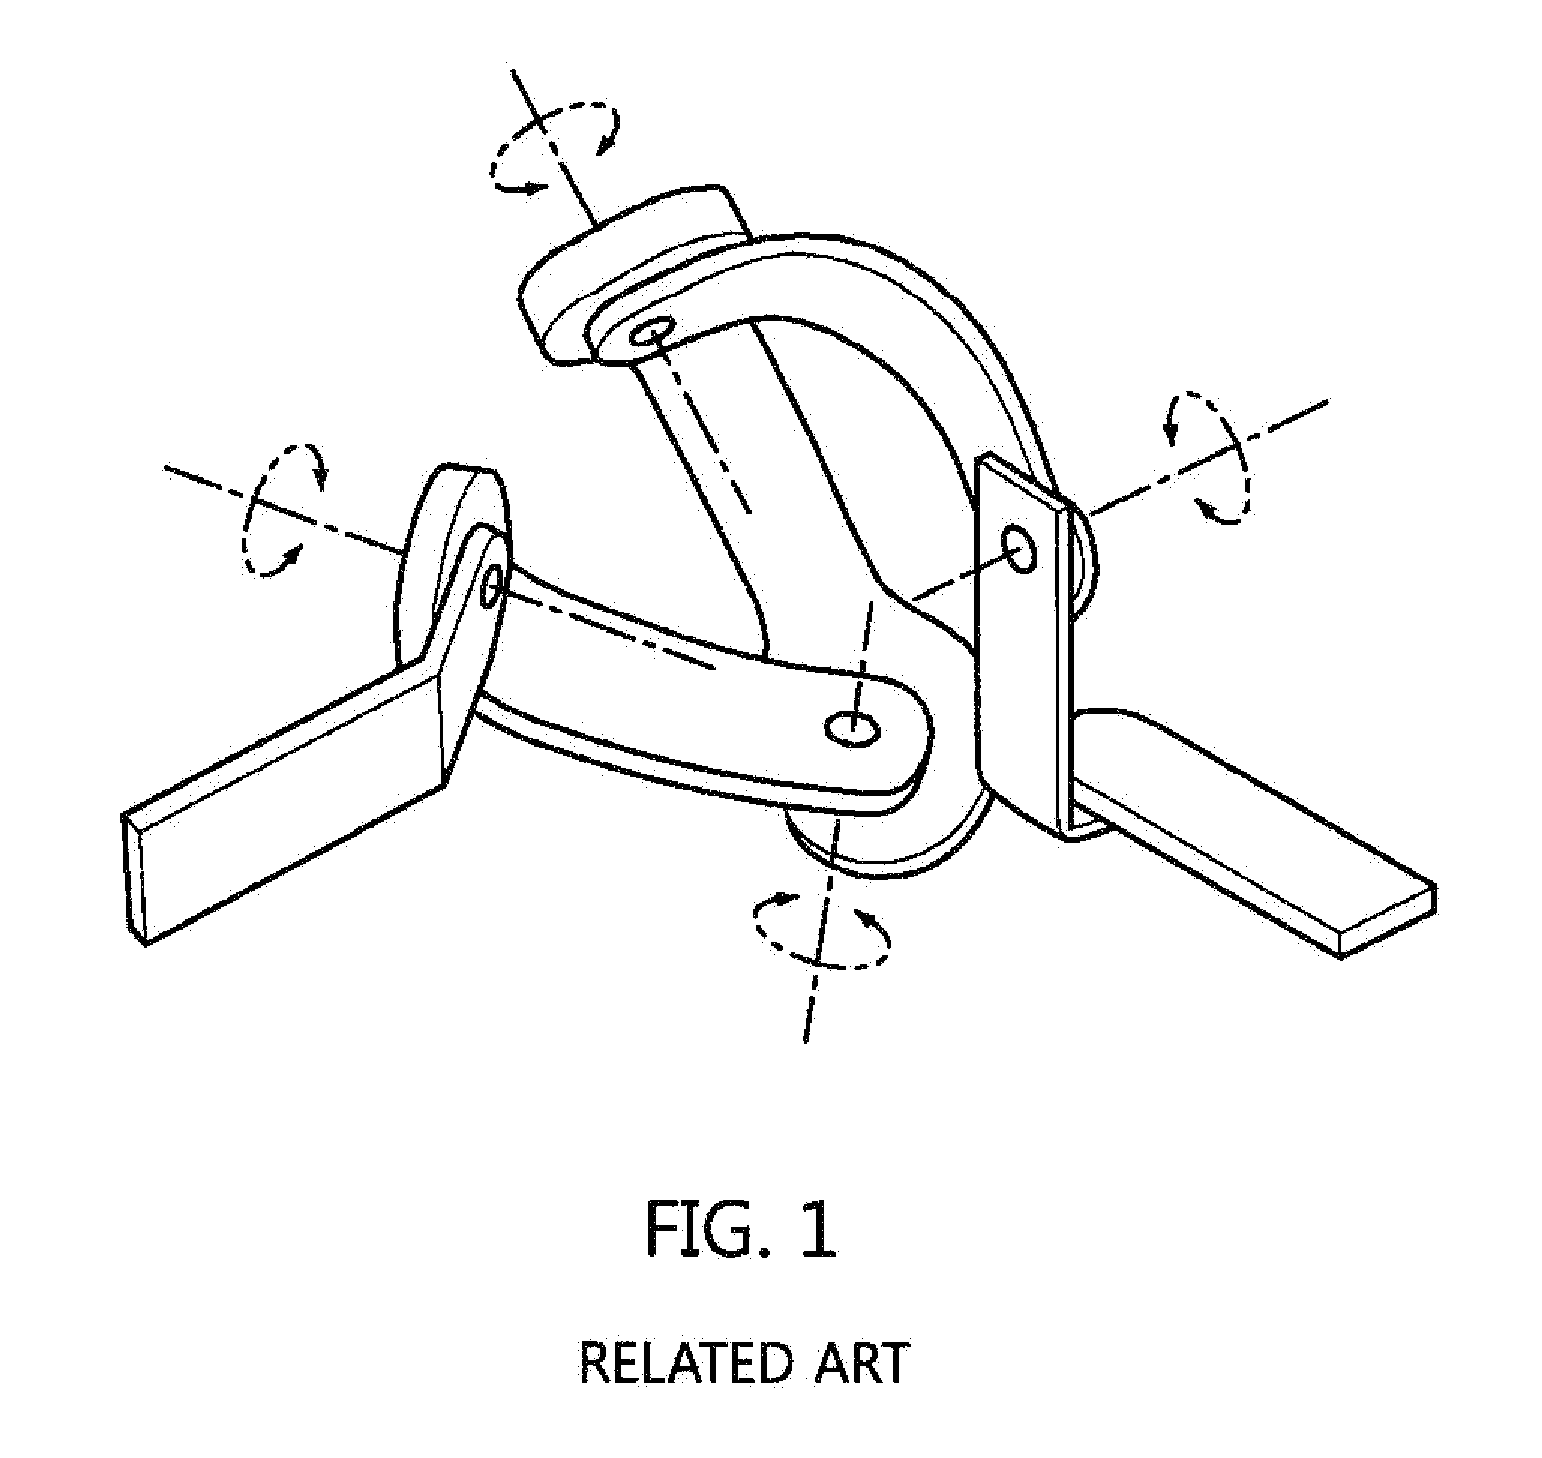 Wearable apparatus for measuring position and action of arm